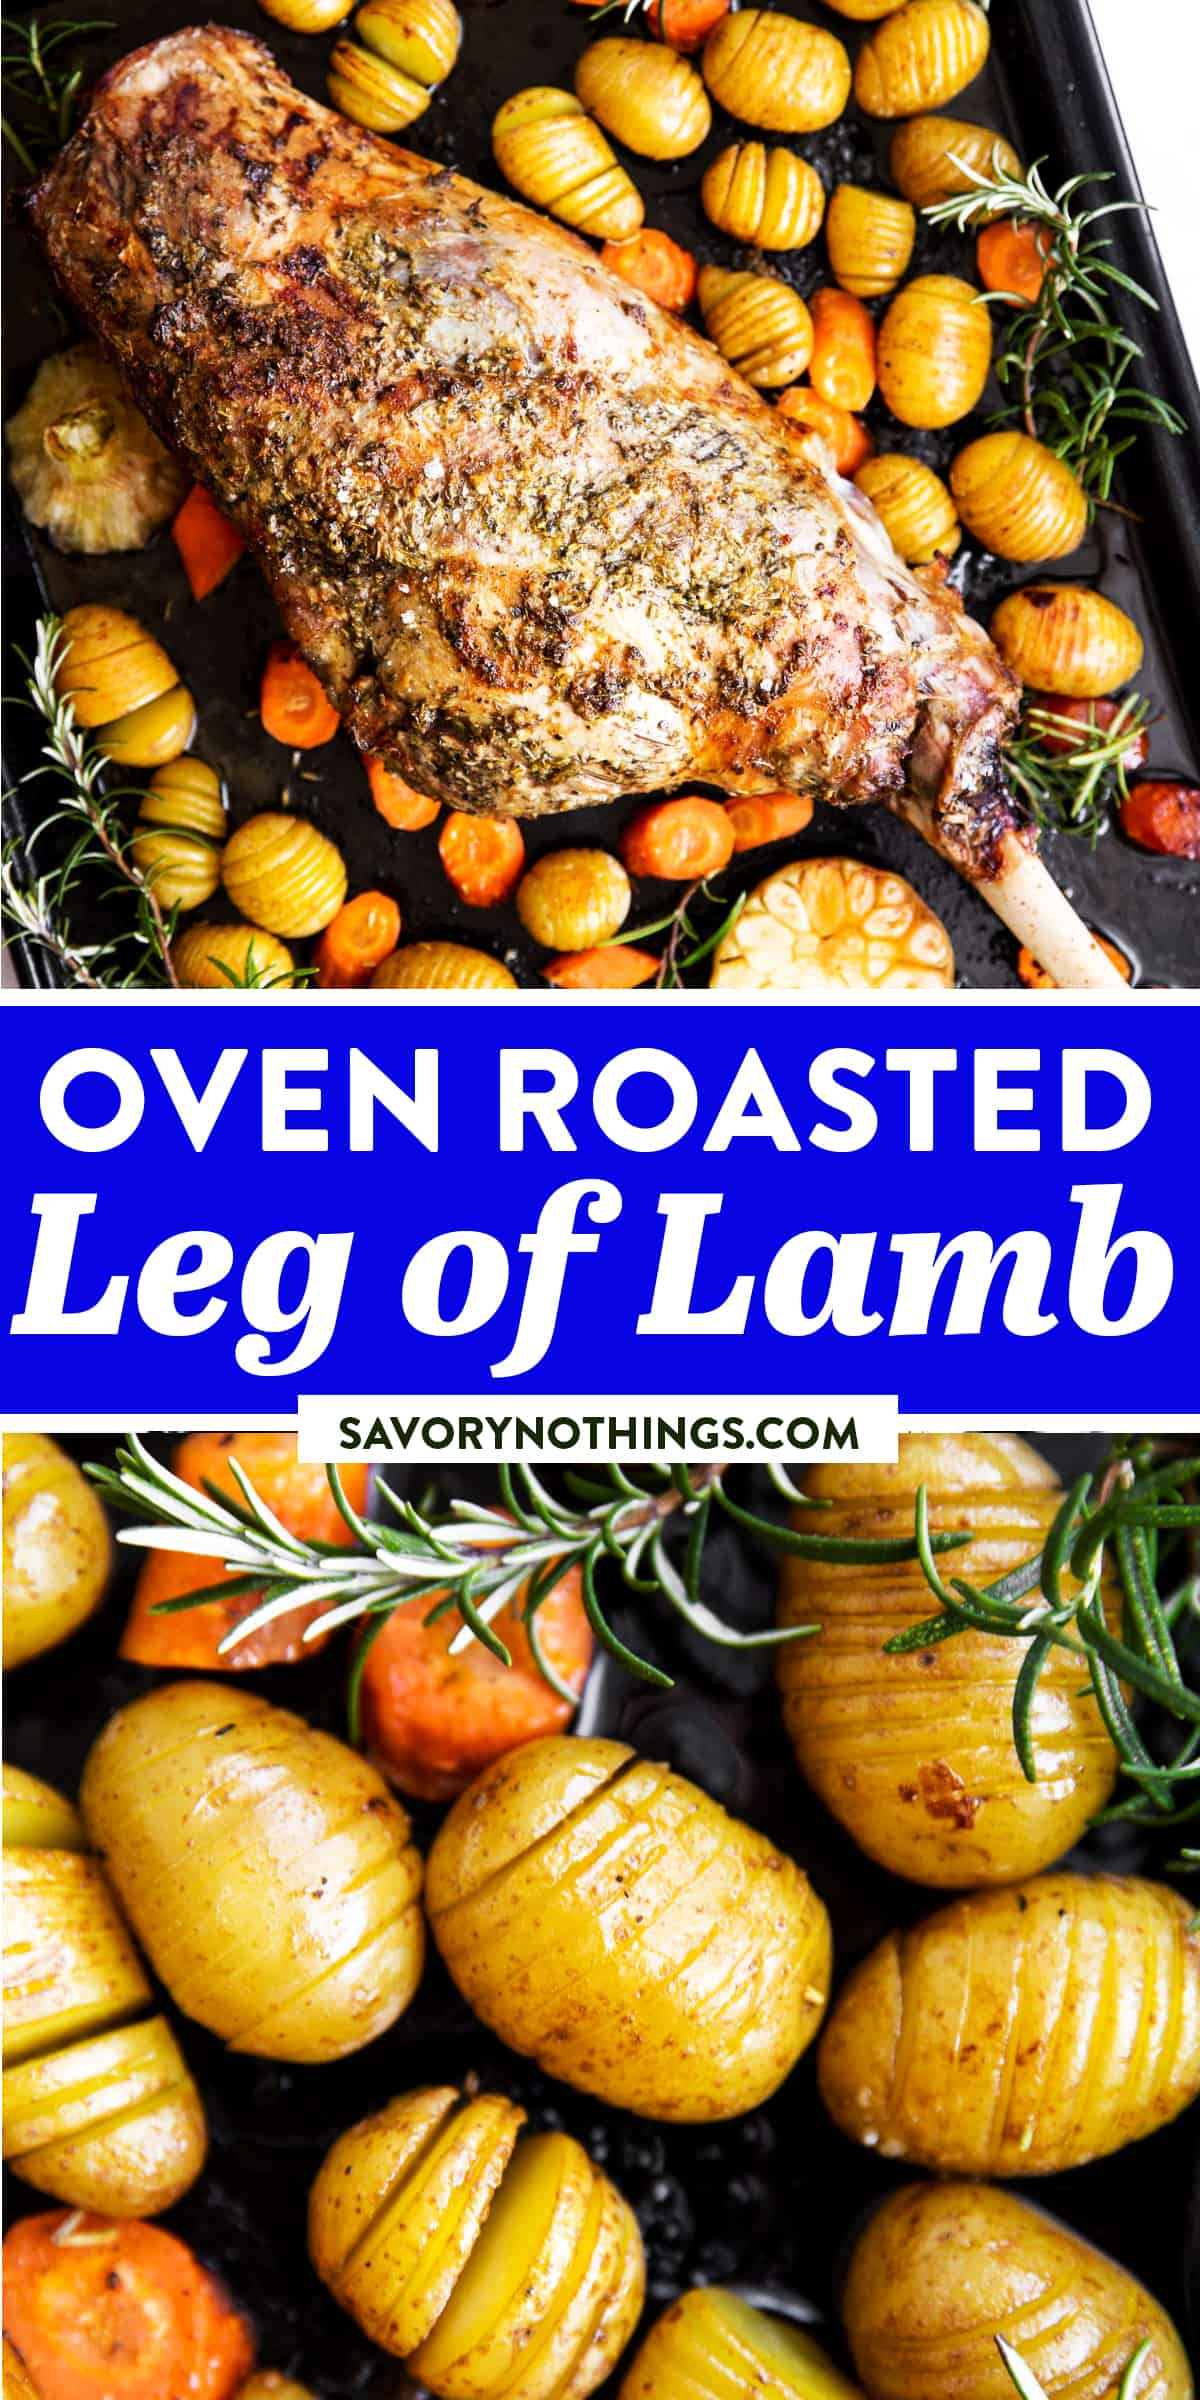 Oven Roasted Leg of Lamb Recipe [+ Video] | Savory Nothings